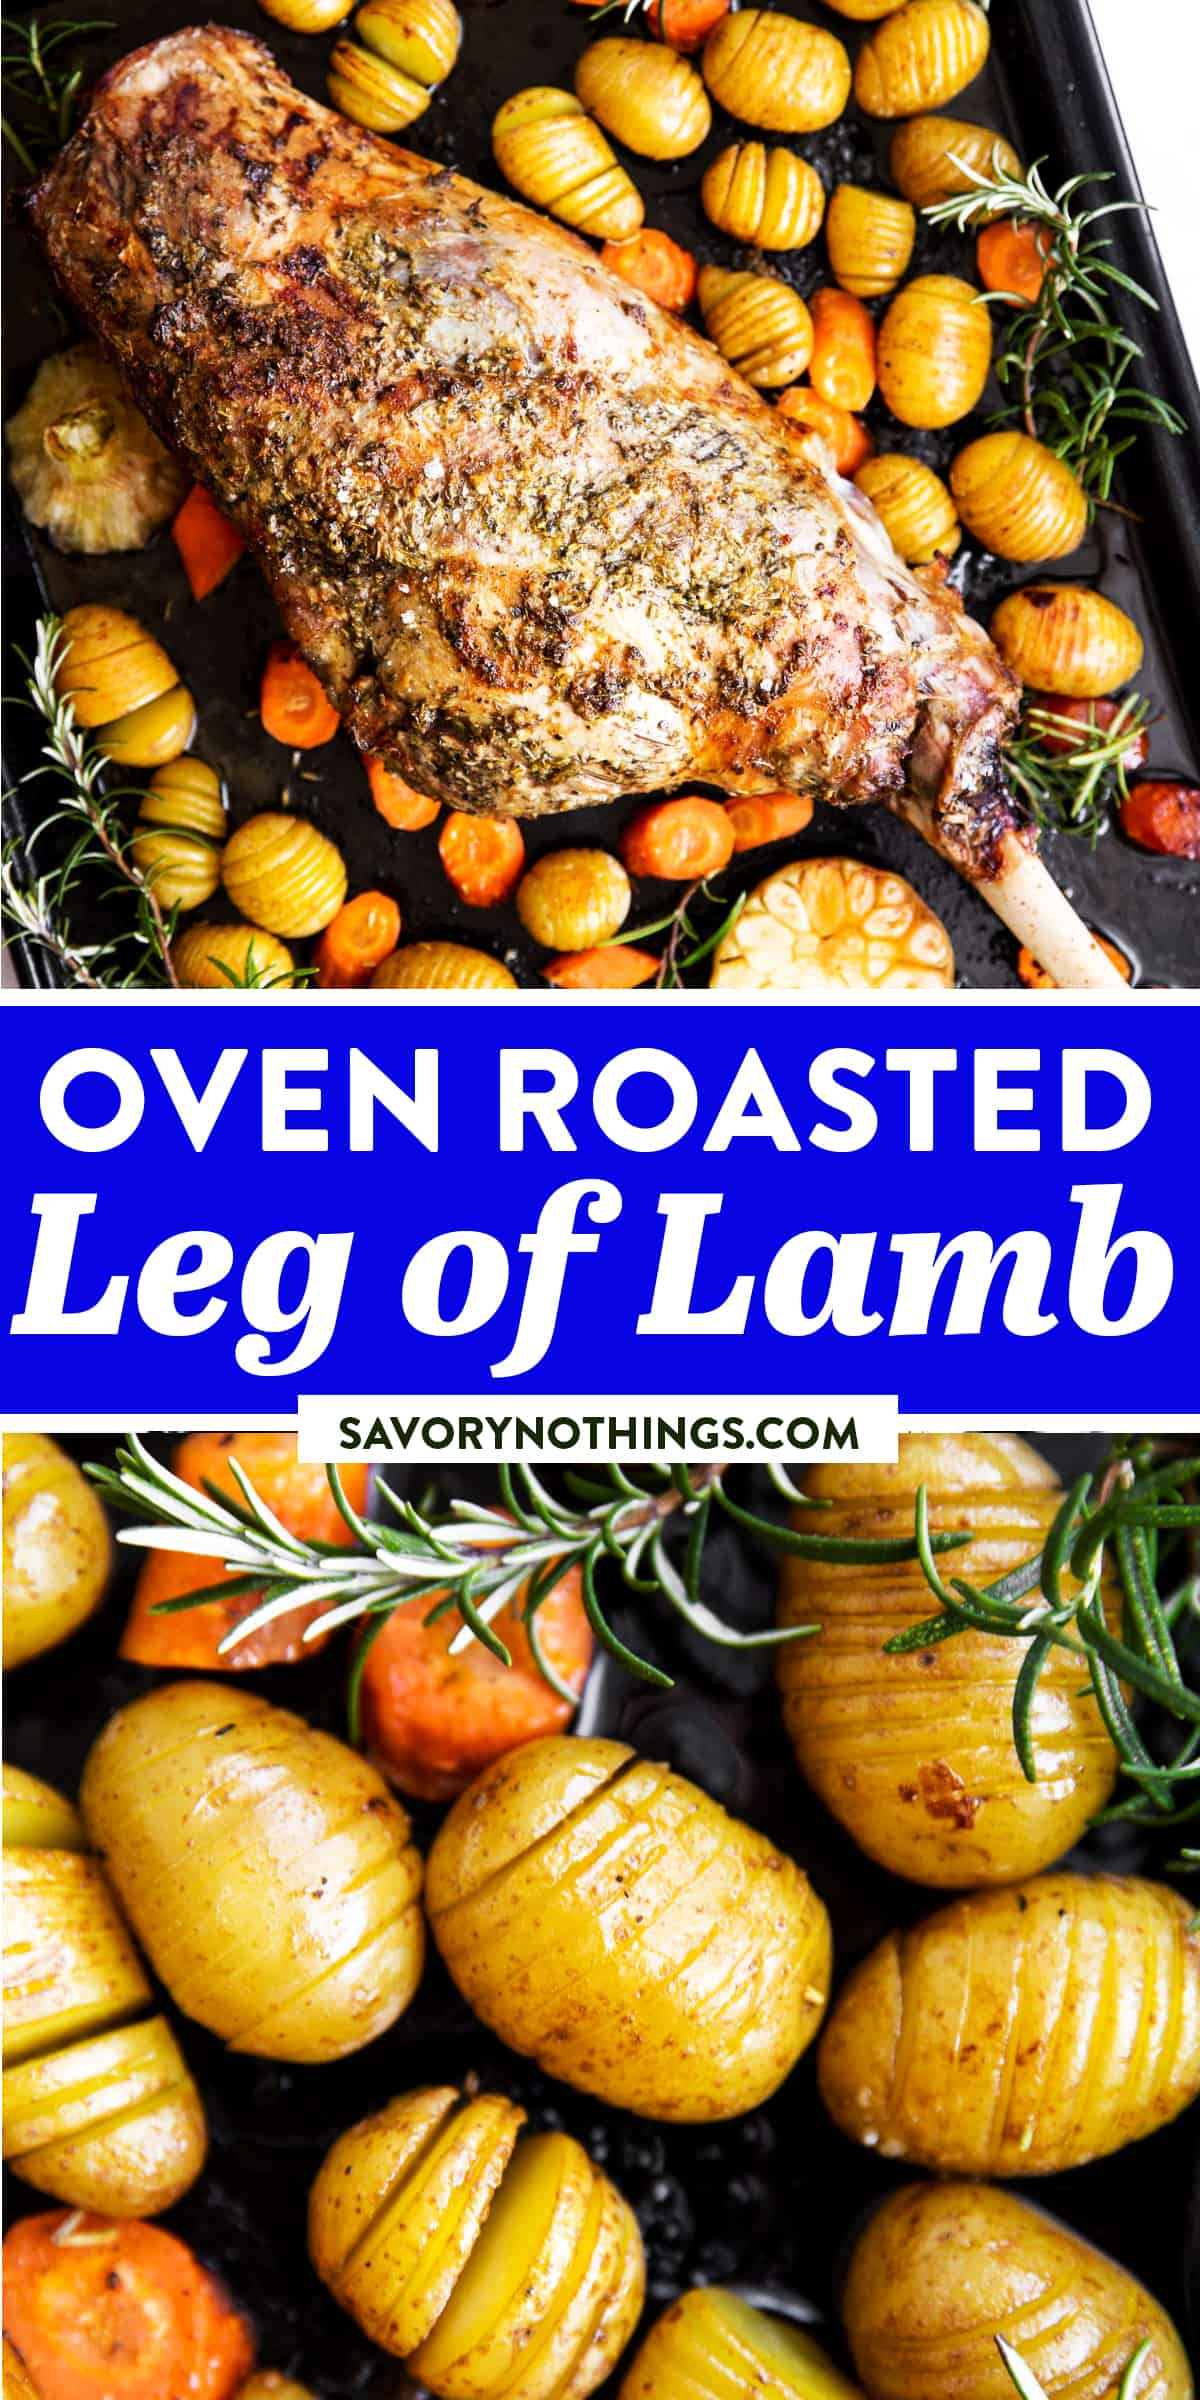 Oven Roasted Leg of Lamb Recipe [+ Video] | Savory Nothings